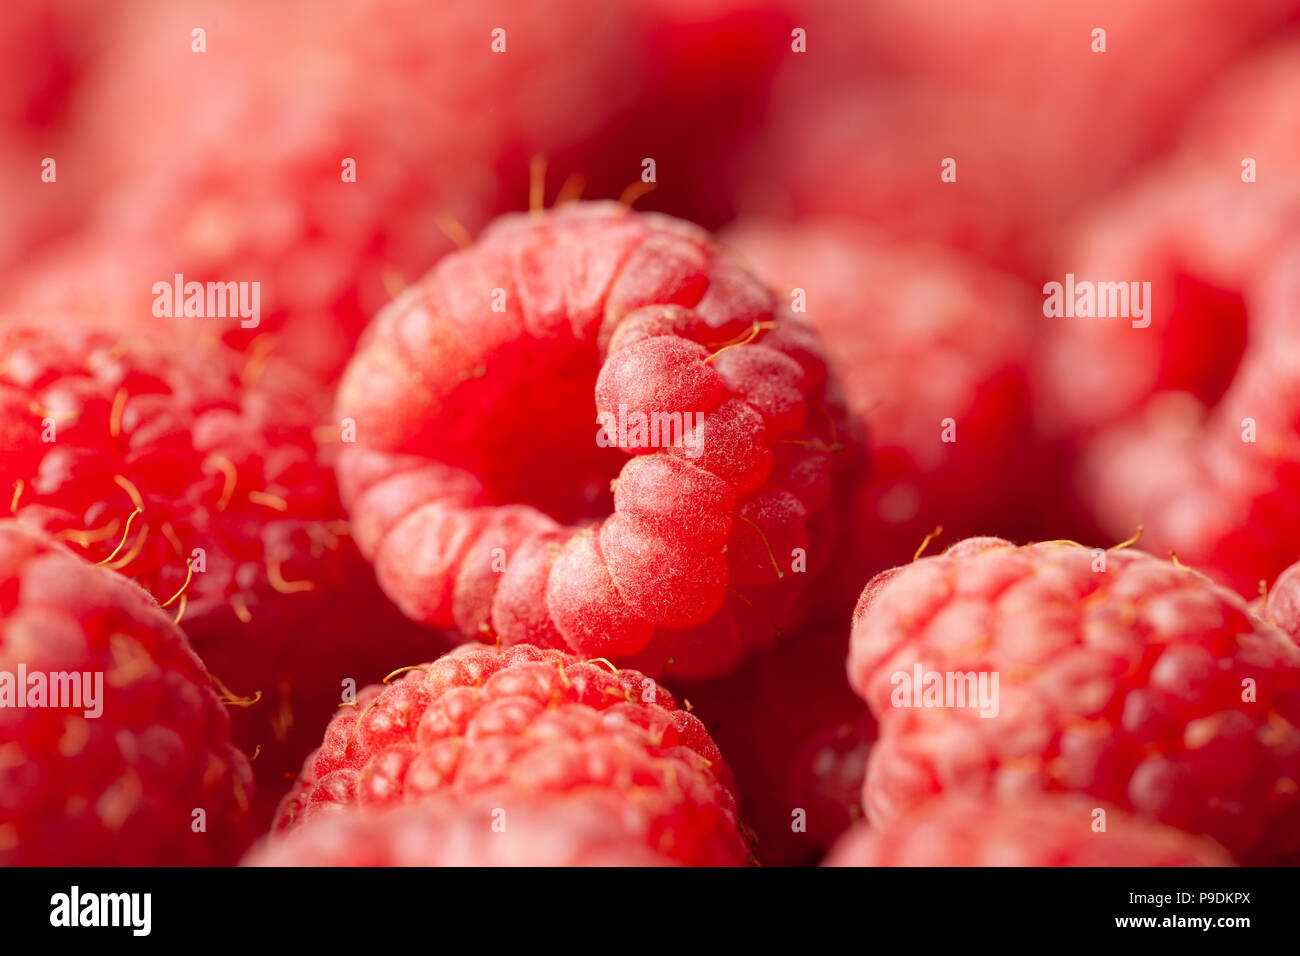 Macro view of ripe red and fresh raspberries as a background. Full frame image. Stock Photo